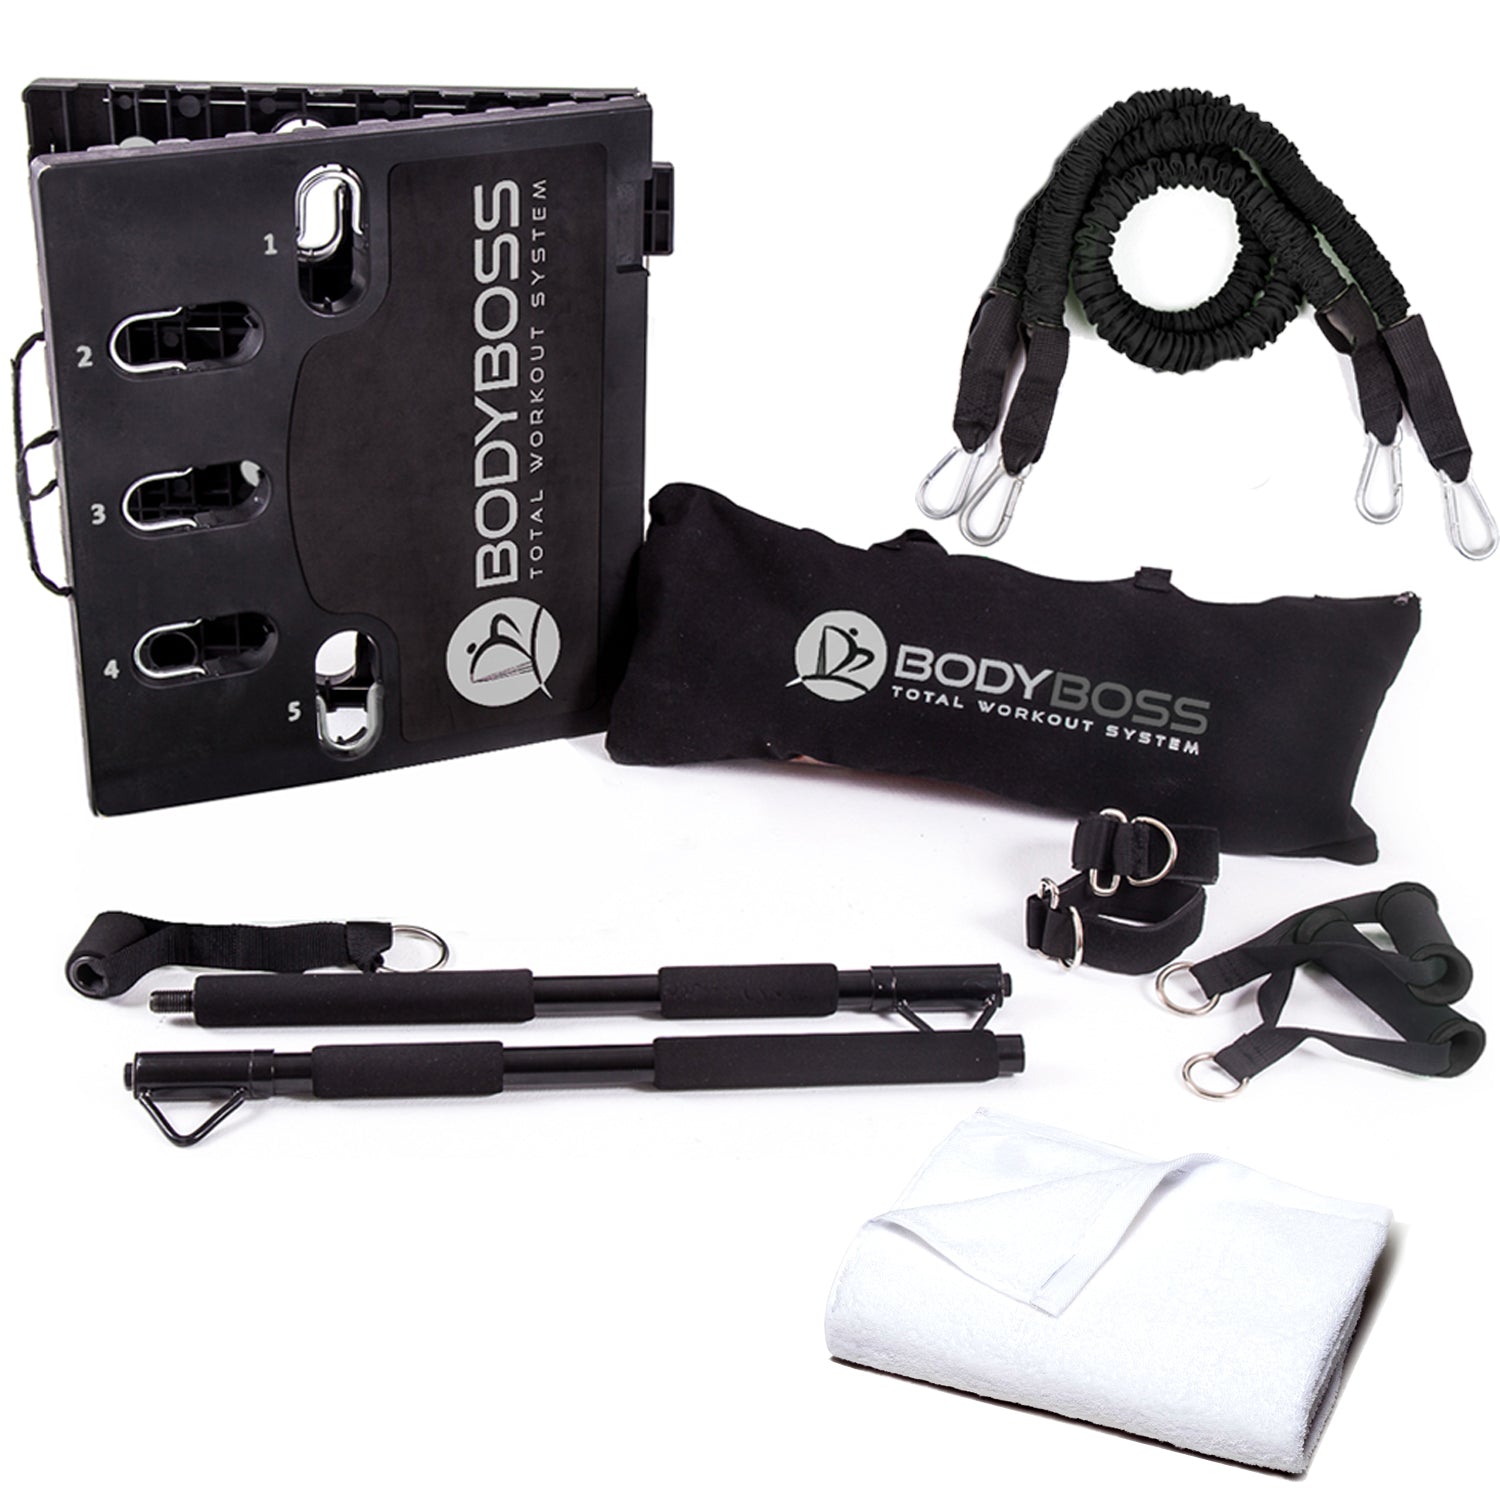  BodyBoss Home Gym 2.0 - Full Portable Gym Home Workout Package,  Includes 1 Set of Resistance Bands (2) - Collapsible Resistance Bar, 2  Handles + More - Full Body Workouts for